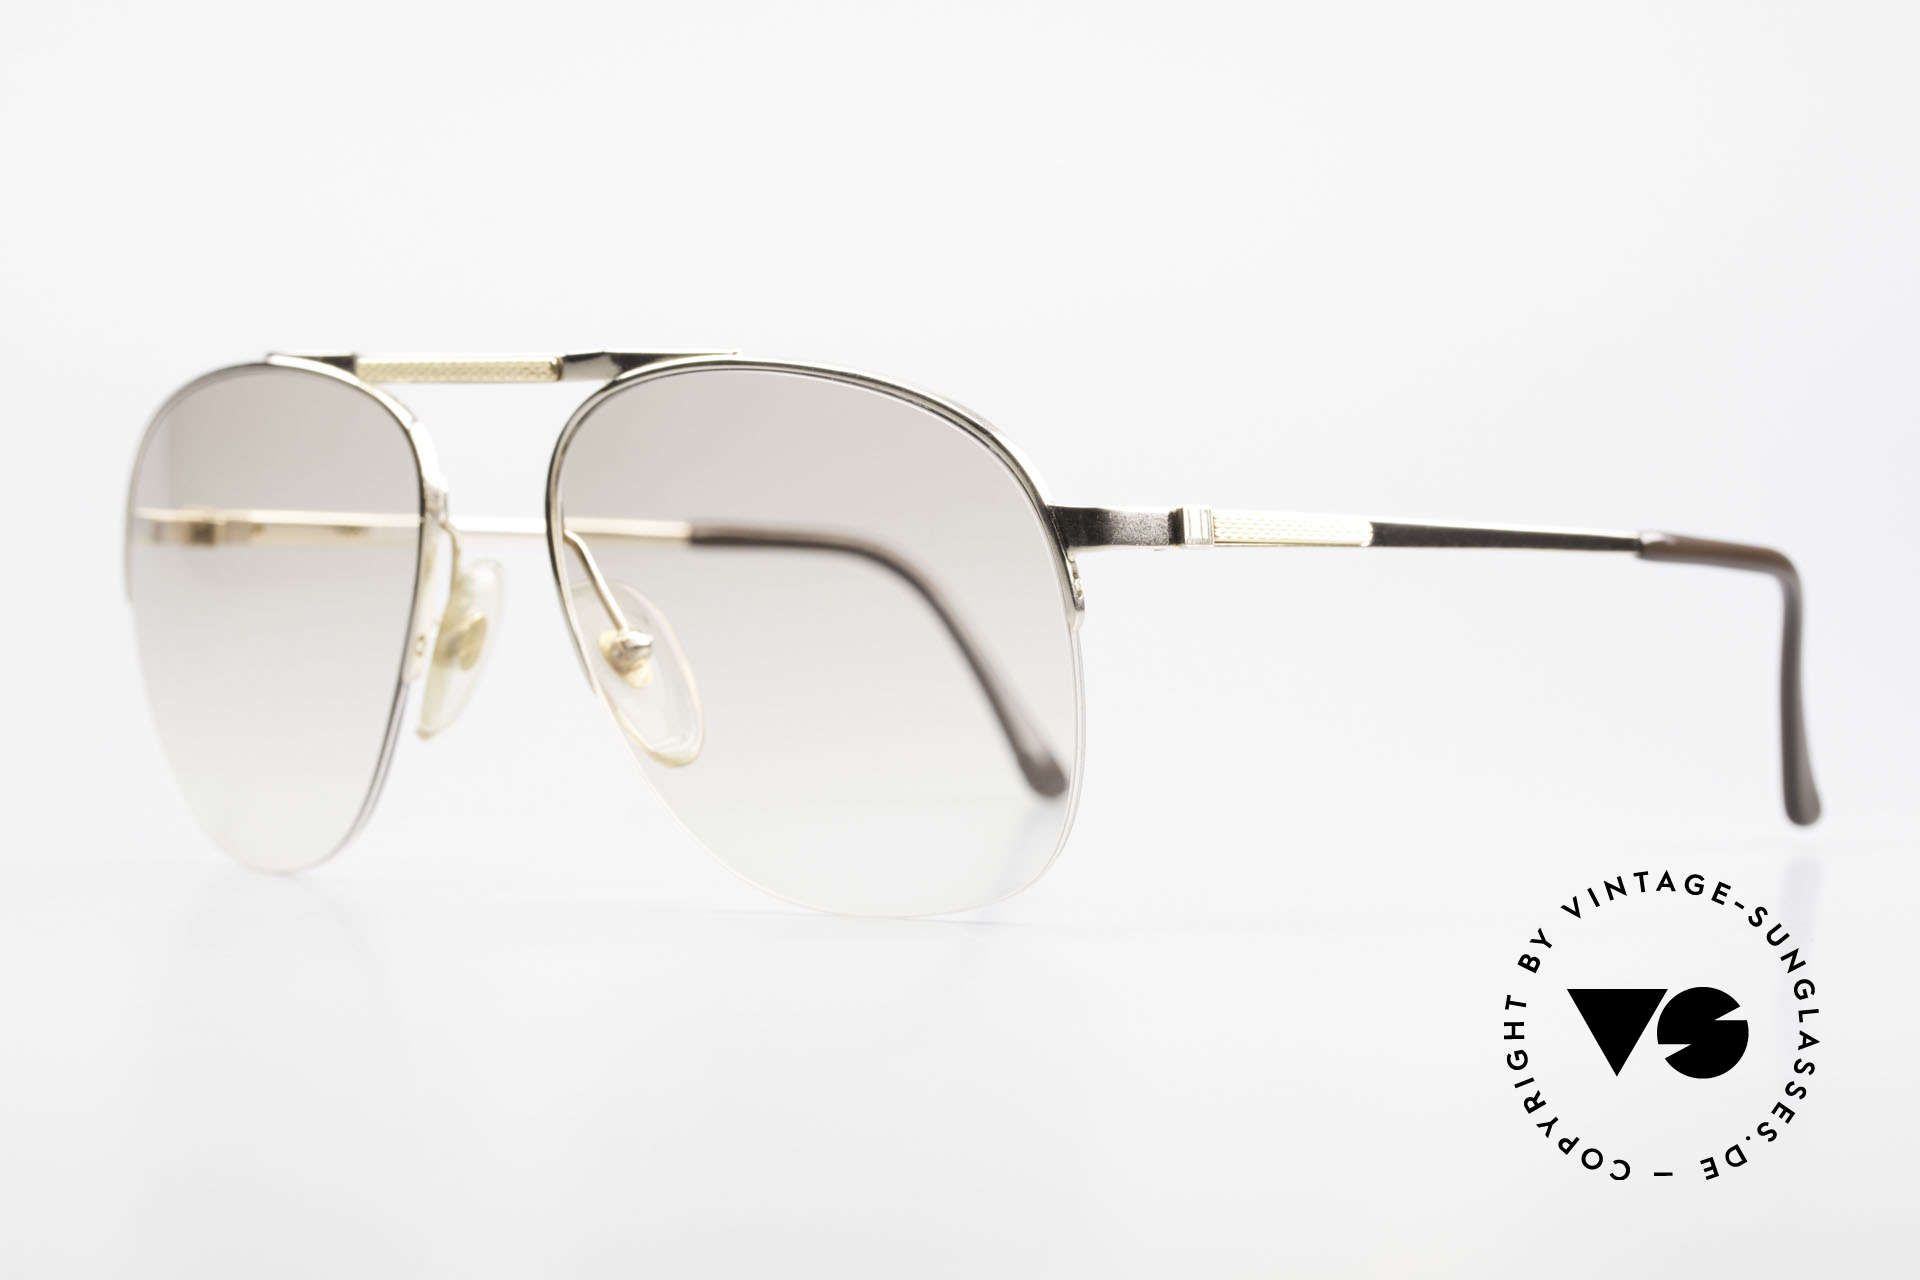 Dunhill 6022 Rare 80's Gentlemen's Frame, precious, gold-plated frame with light-tinted lenses, Made for Men